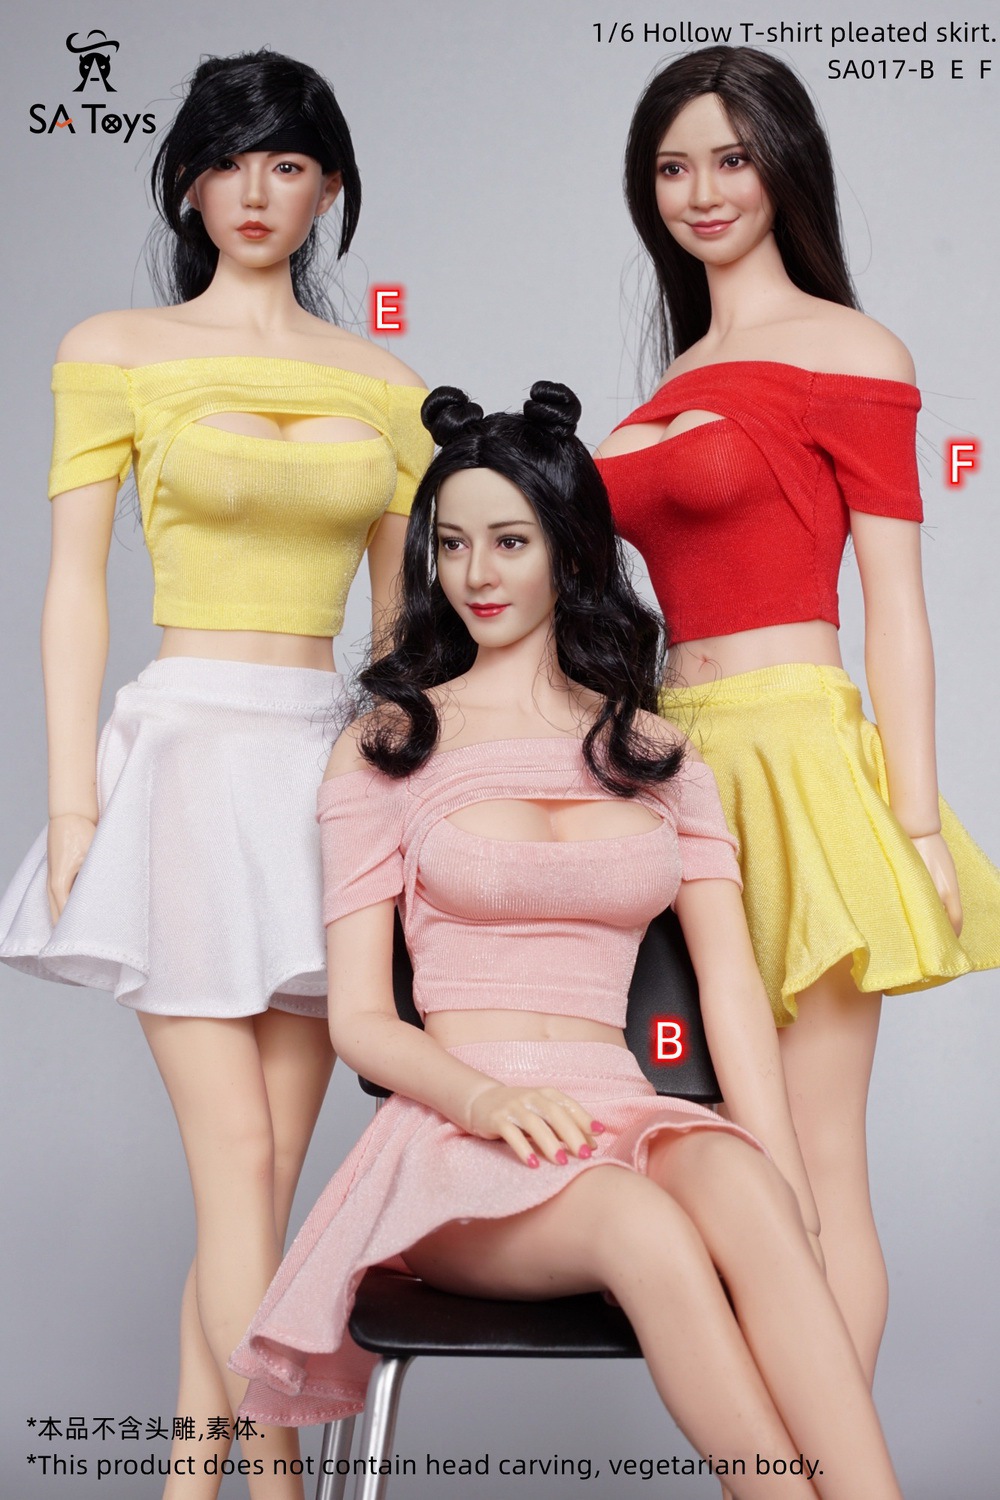 sidezipperskirt - NEW PRODUCT: SA Toys: 1/6 Personalized Poster Style Tight Dress/ Hollow T-shirt Pleated Skirt/Side Zipper Tight Skirt [Various styles available]  16560010